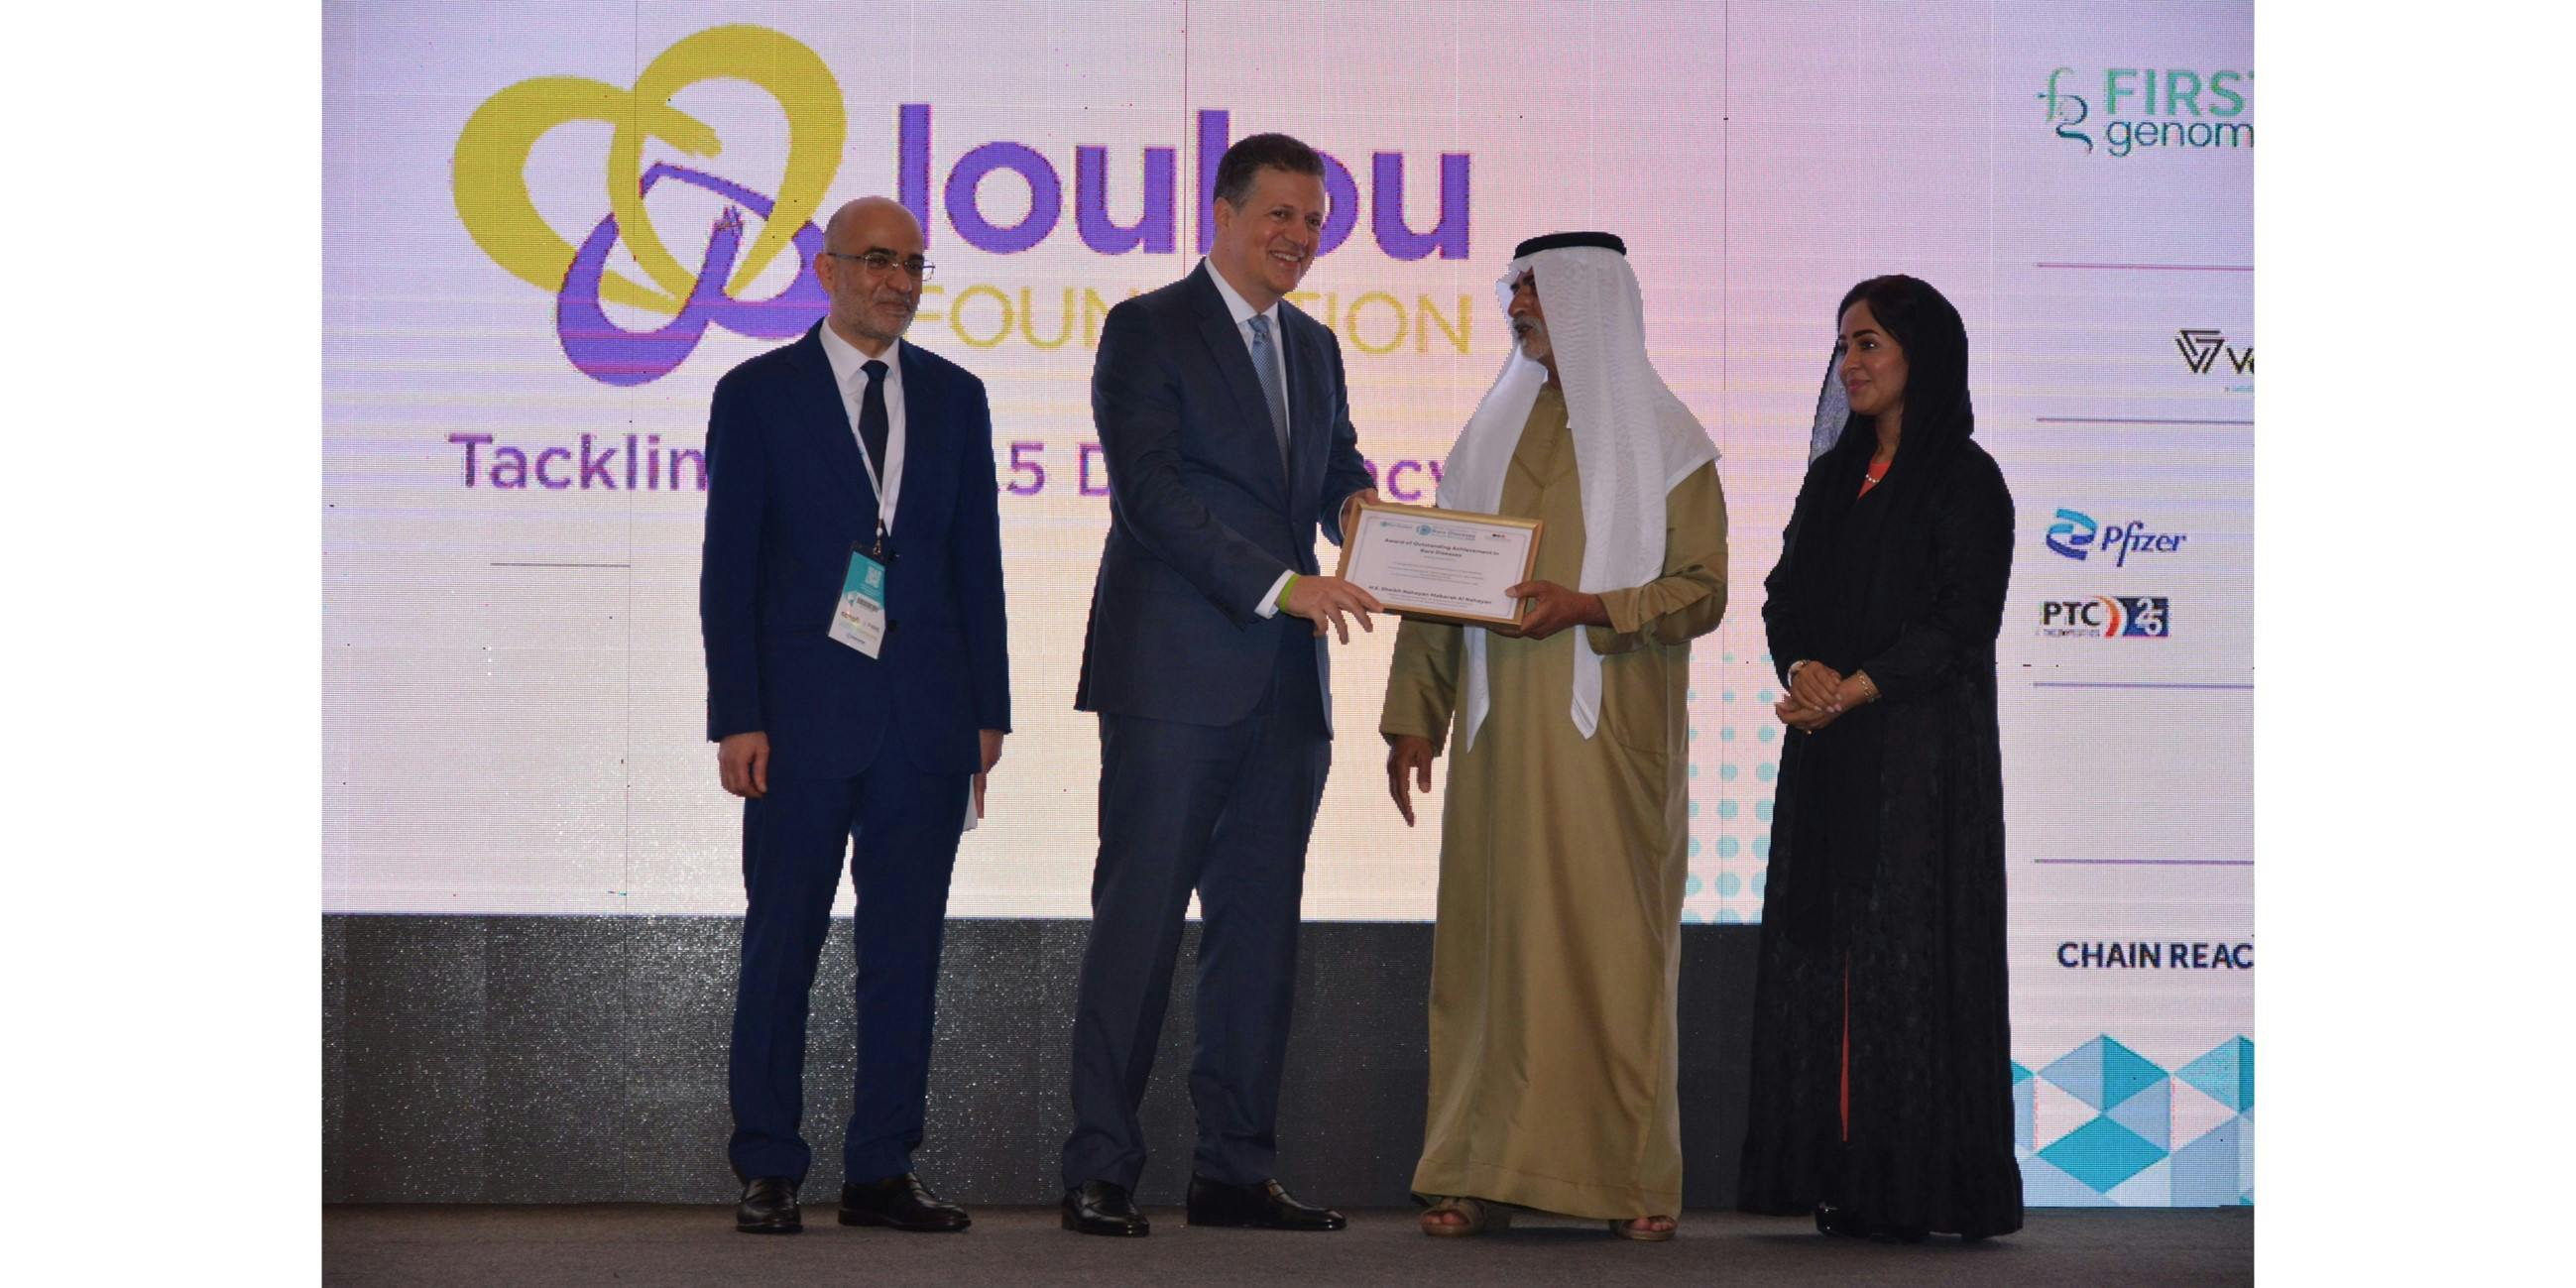 Loulou Foundation honoured with the NODRA Award at the MENA Rare Diseases annual meeting